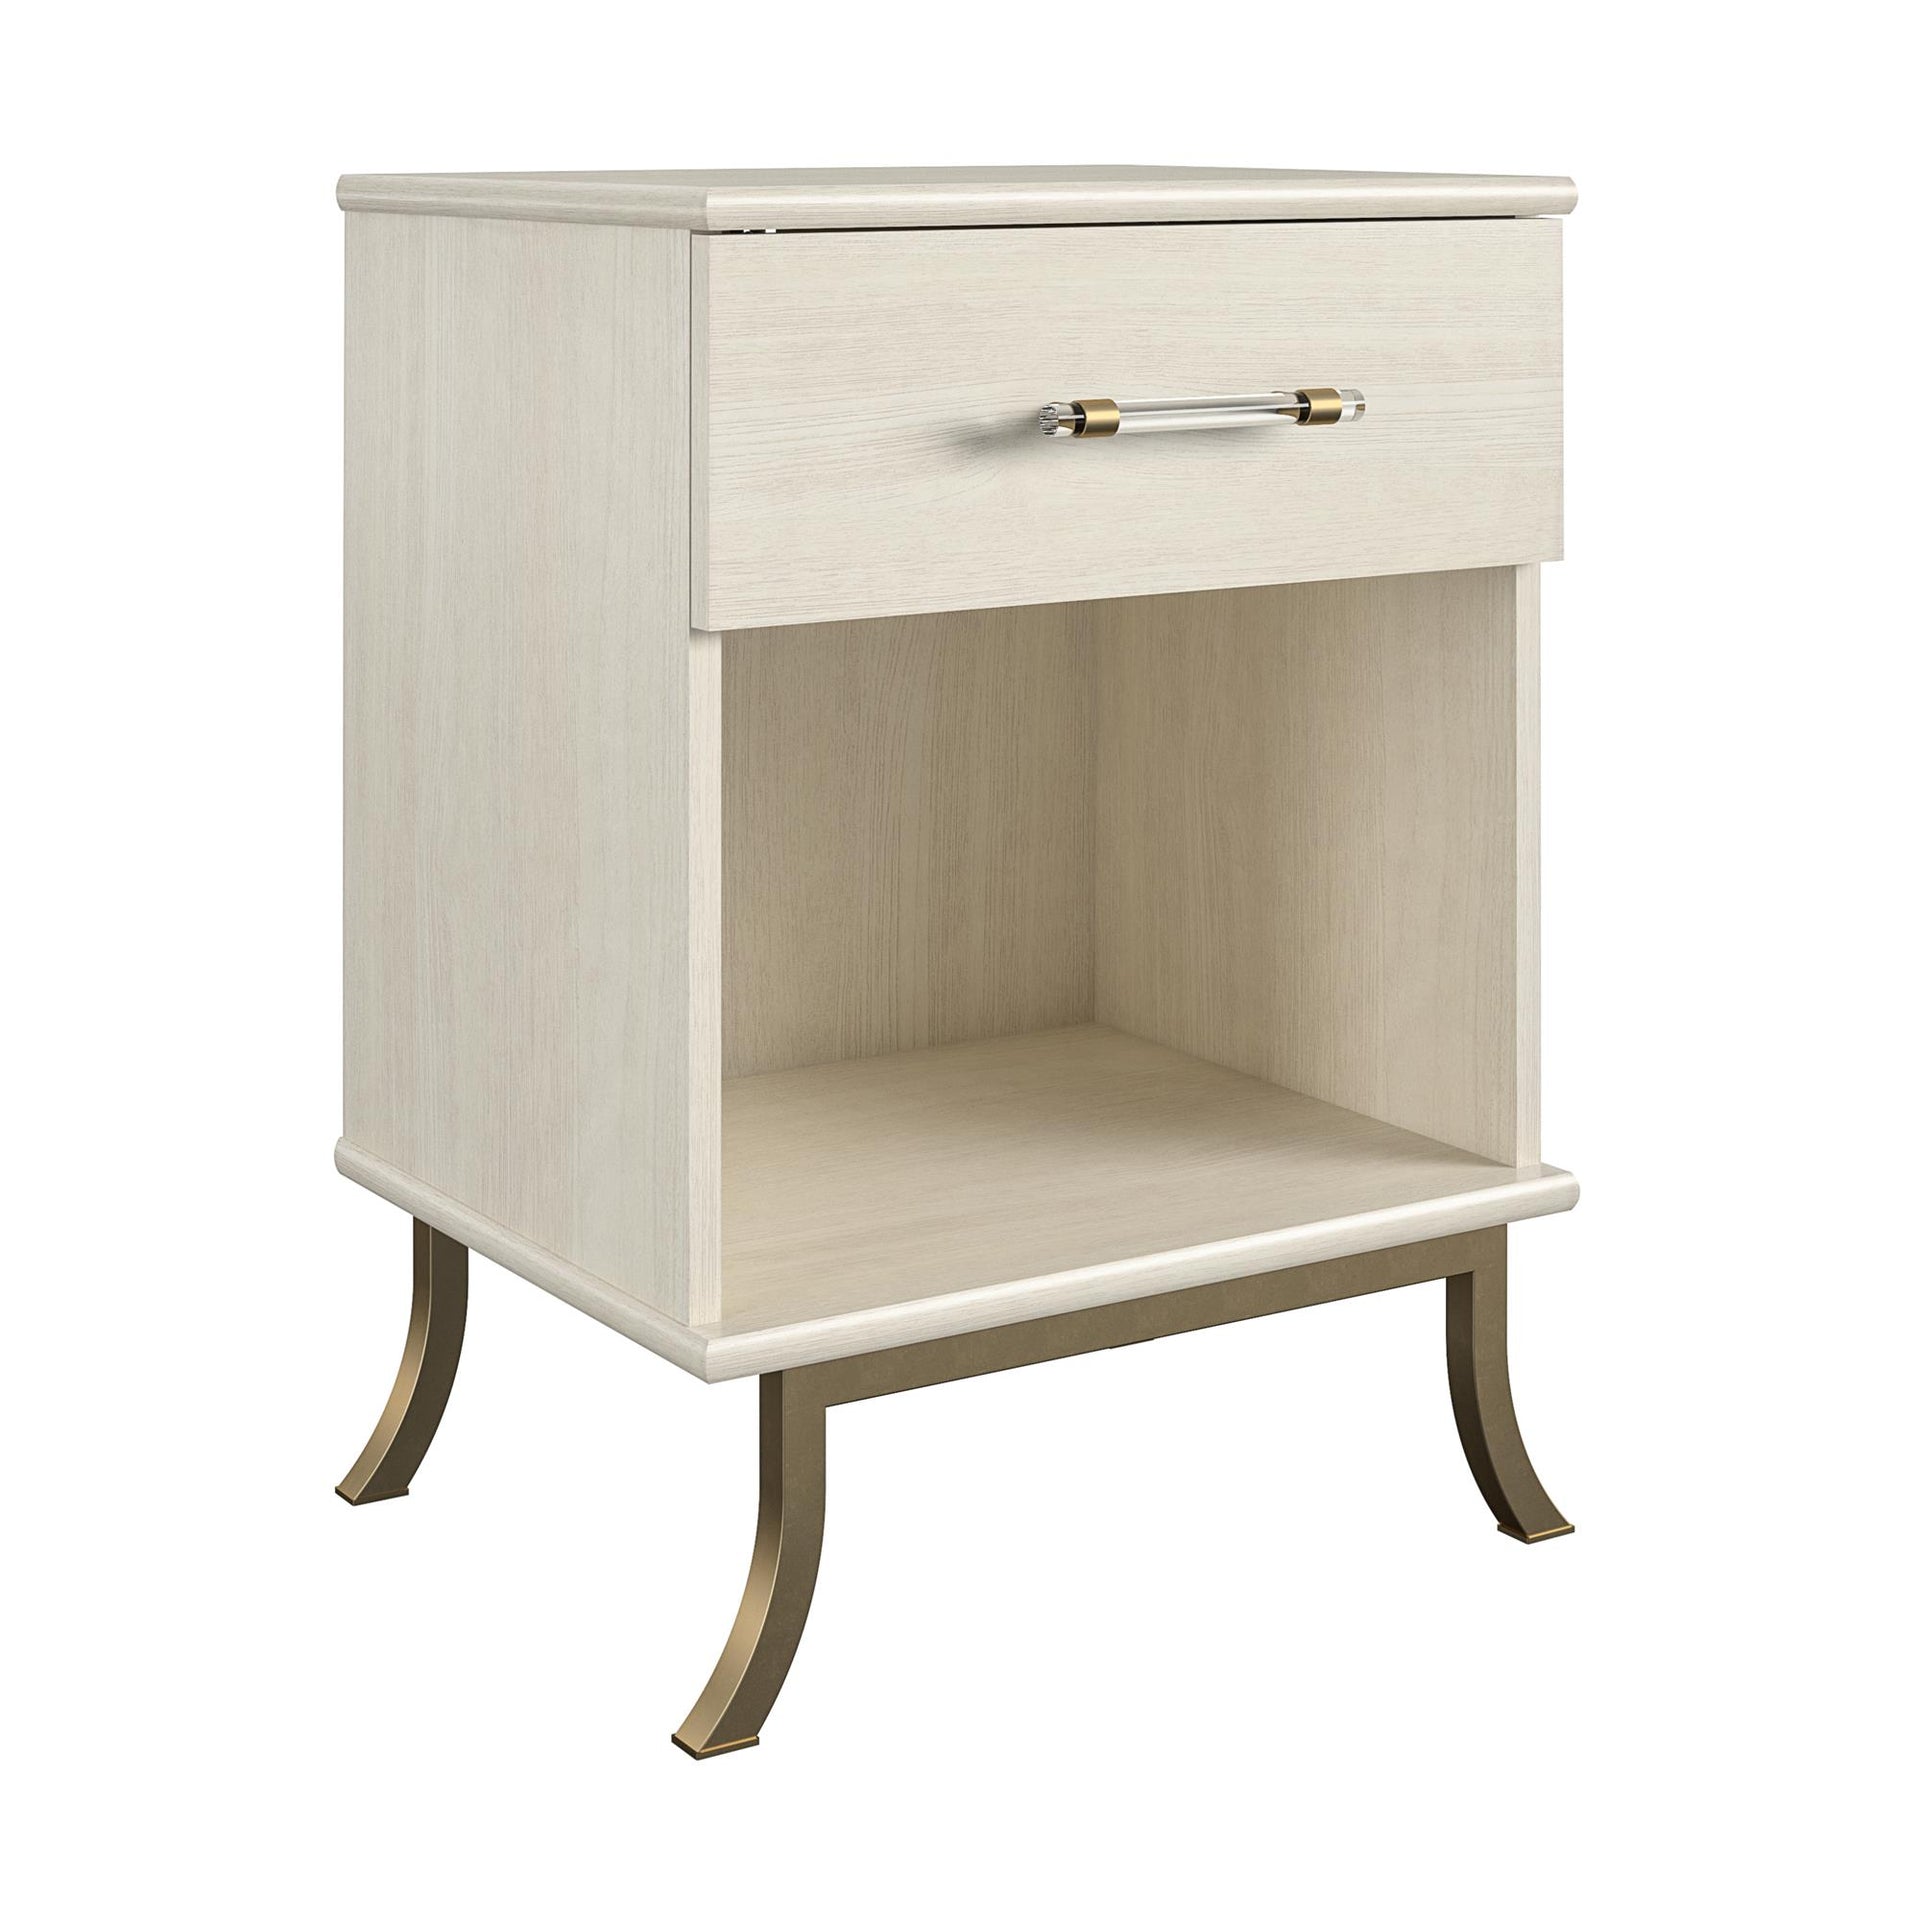 Monarch Hill Clementine White Nightstand - Ivory Oak